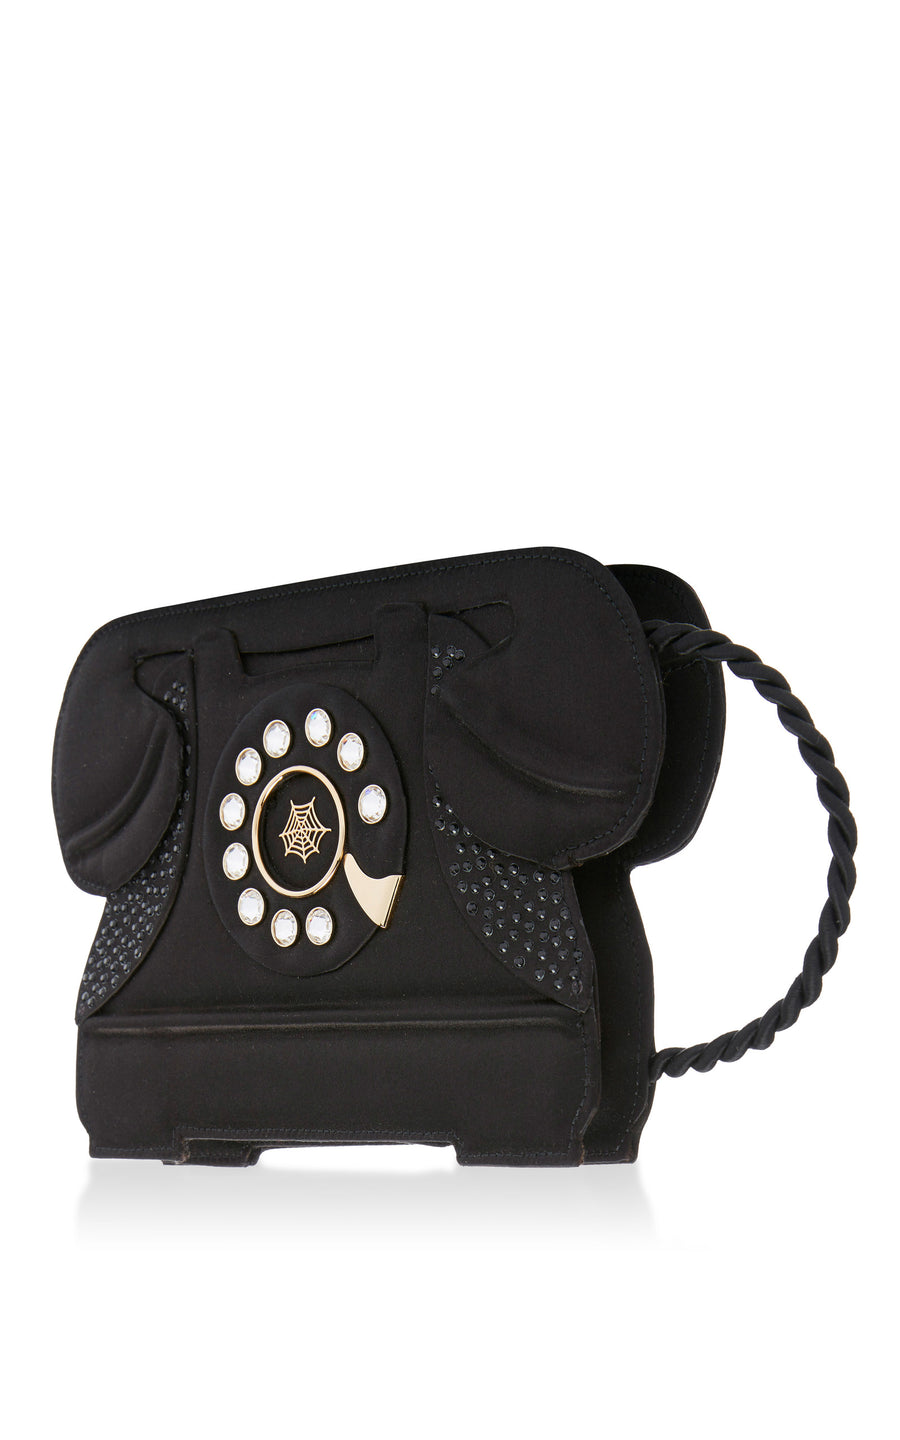 Charlotte Olympia “Dial to Accessorise” satin bag